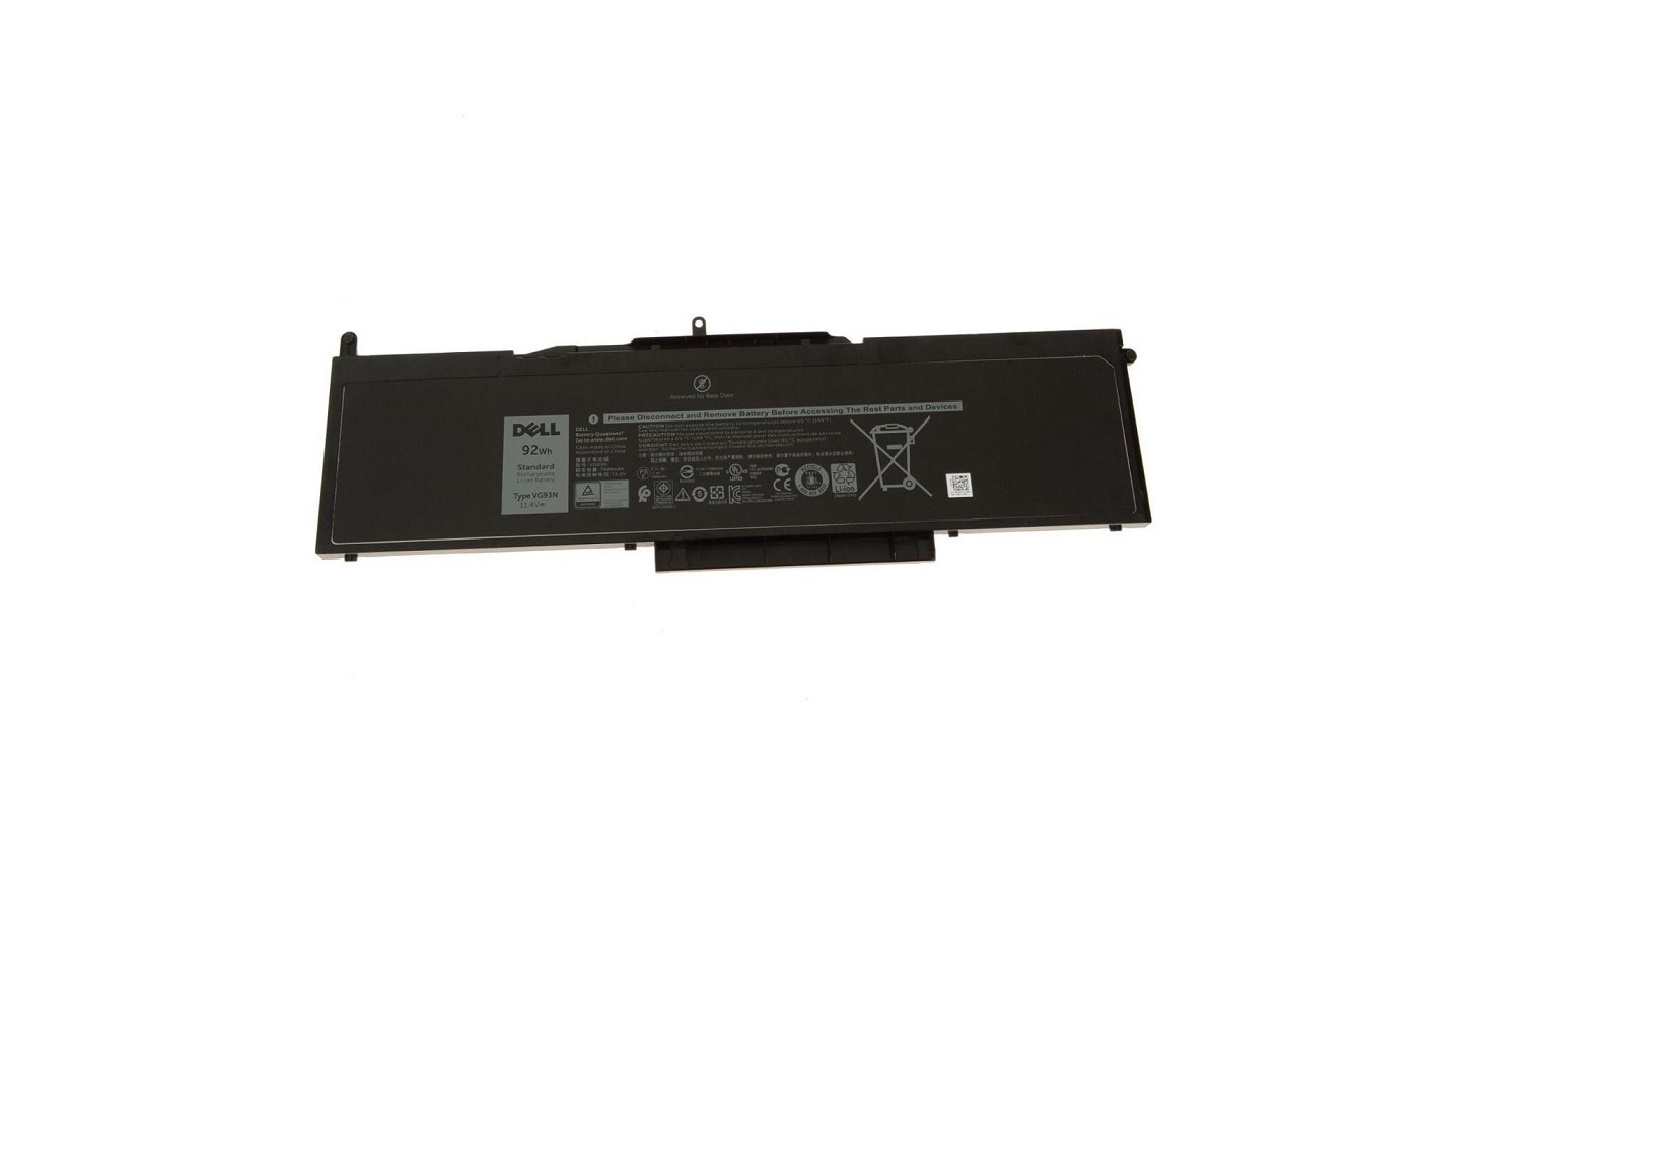 Dell Genuine 92Wh 11.4V 6-Cell Battery For Precision 3520 3530 VG93N Latitude 5280 5290 5480 5490 5491 5495 5580 5590 5591